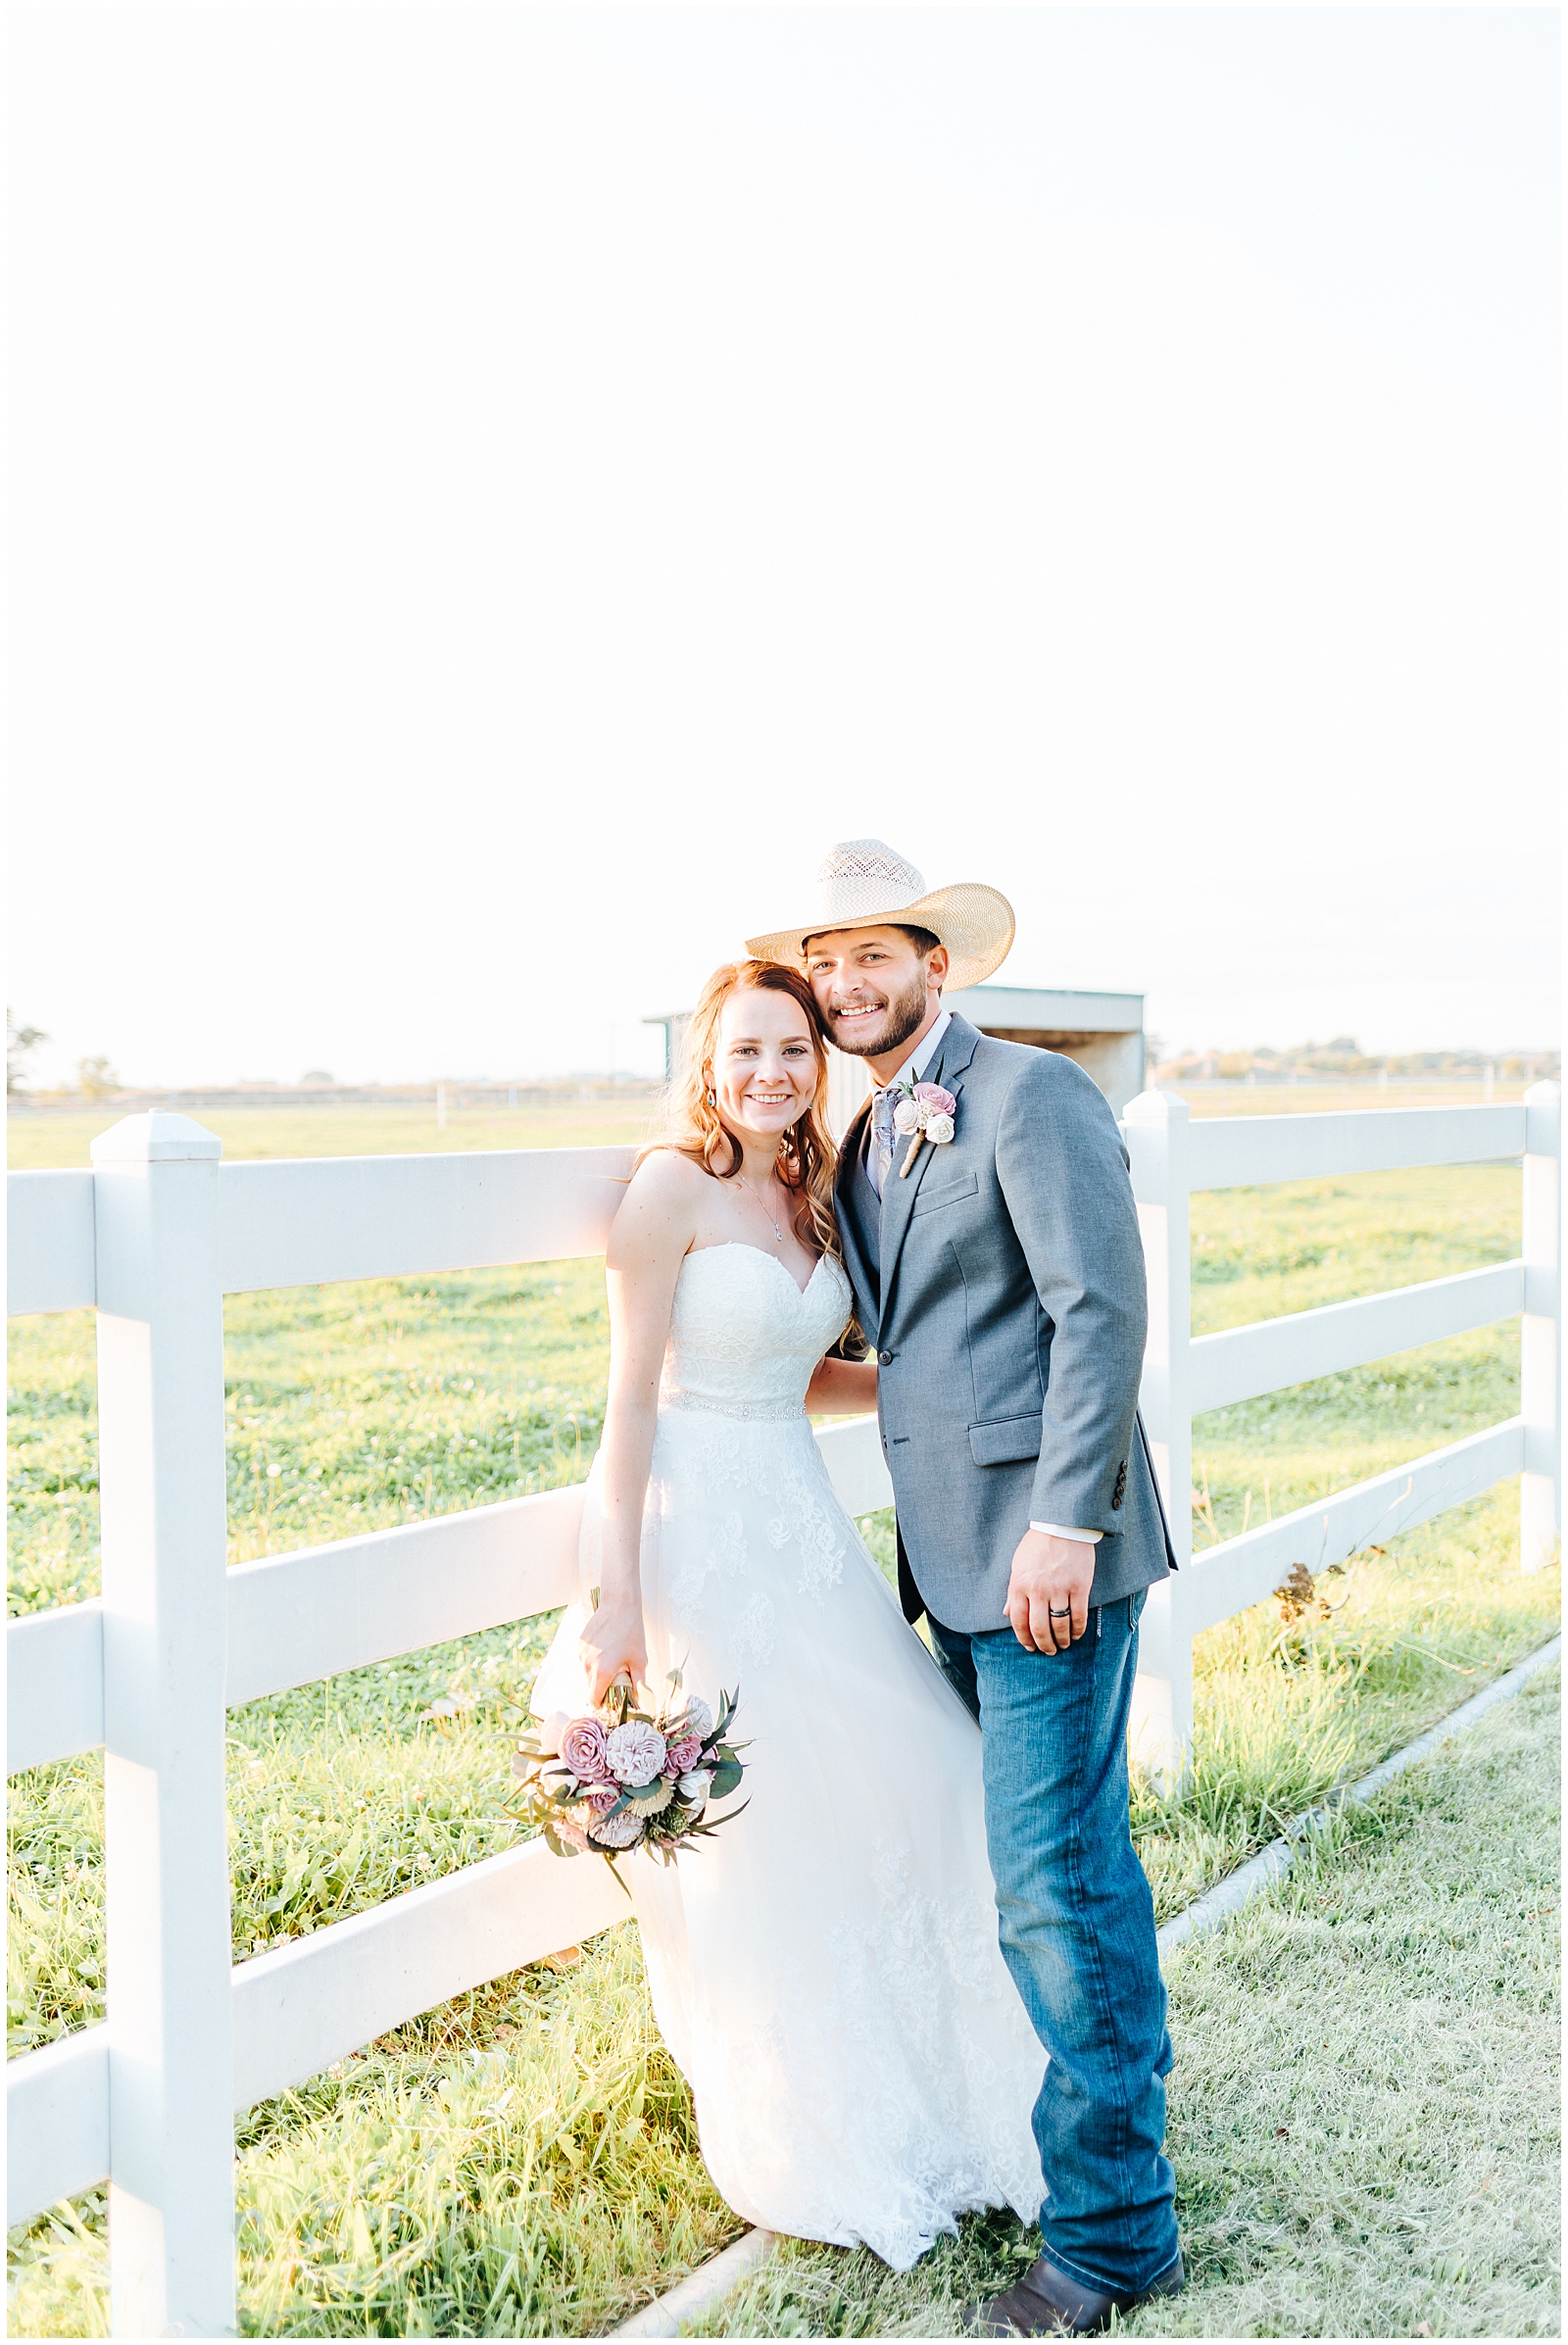 Rustic Chic White Willow Estate Wedding Golden Hour Portraits